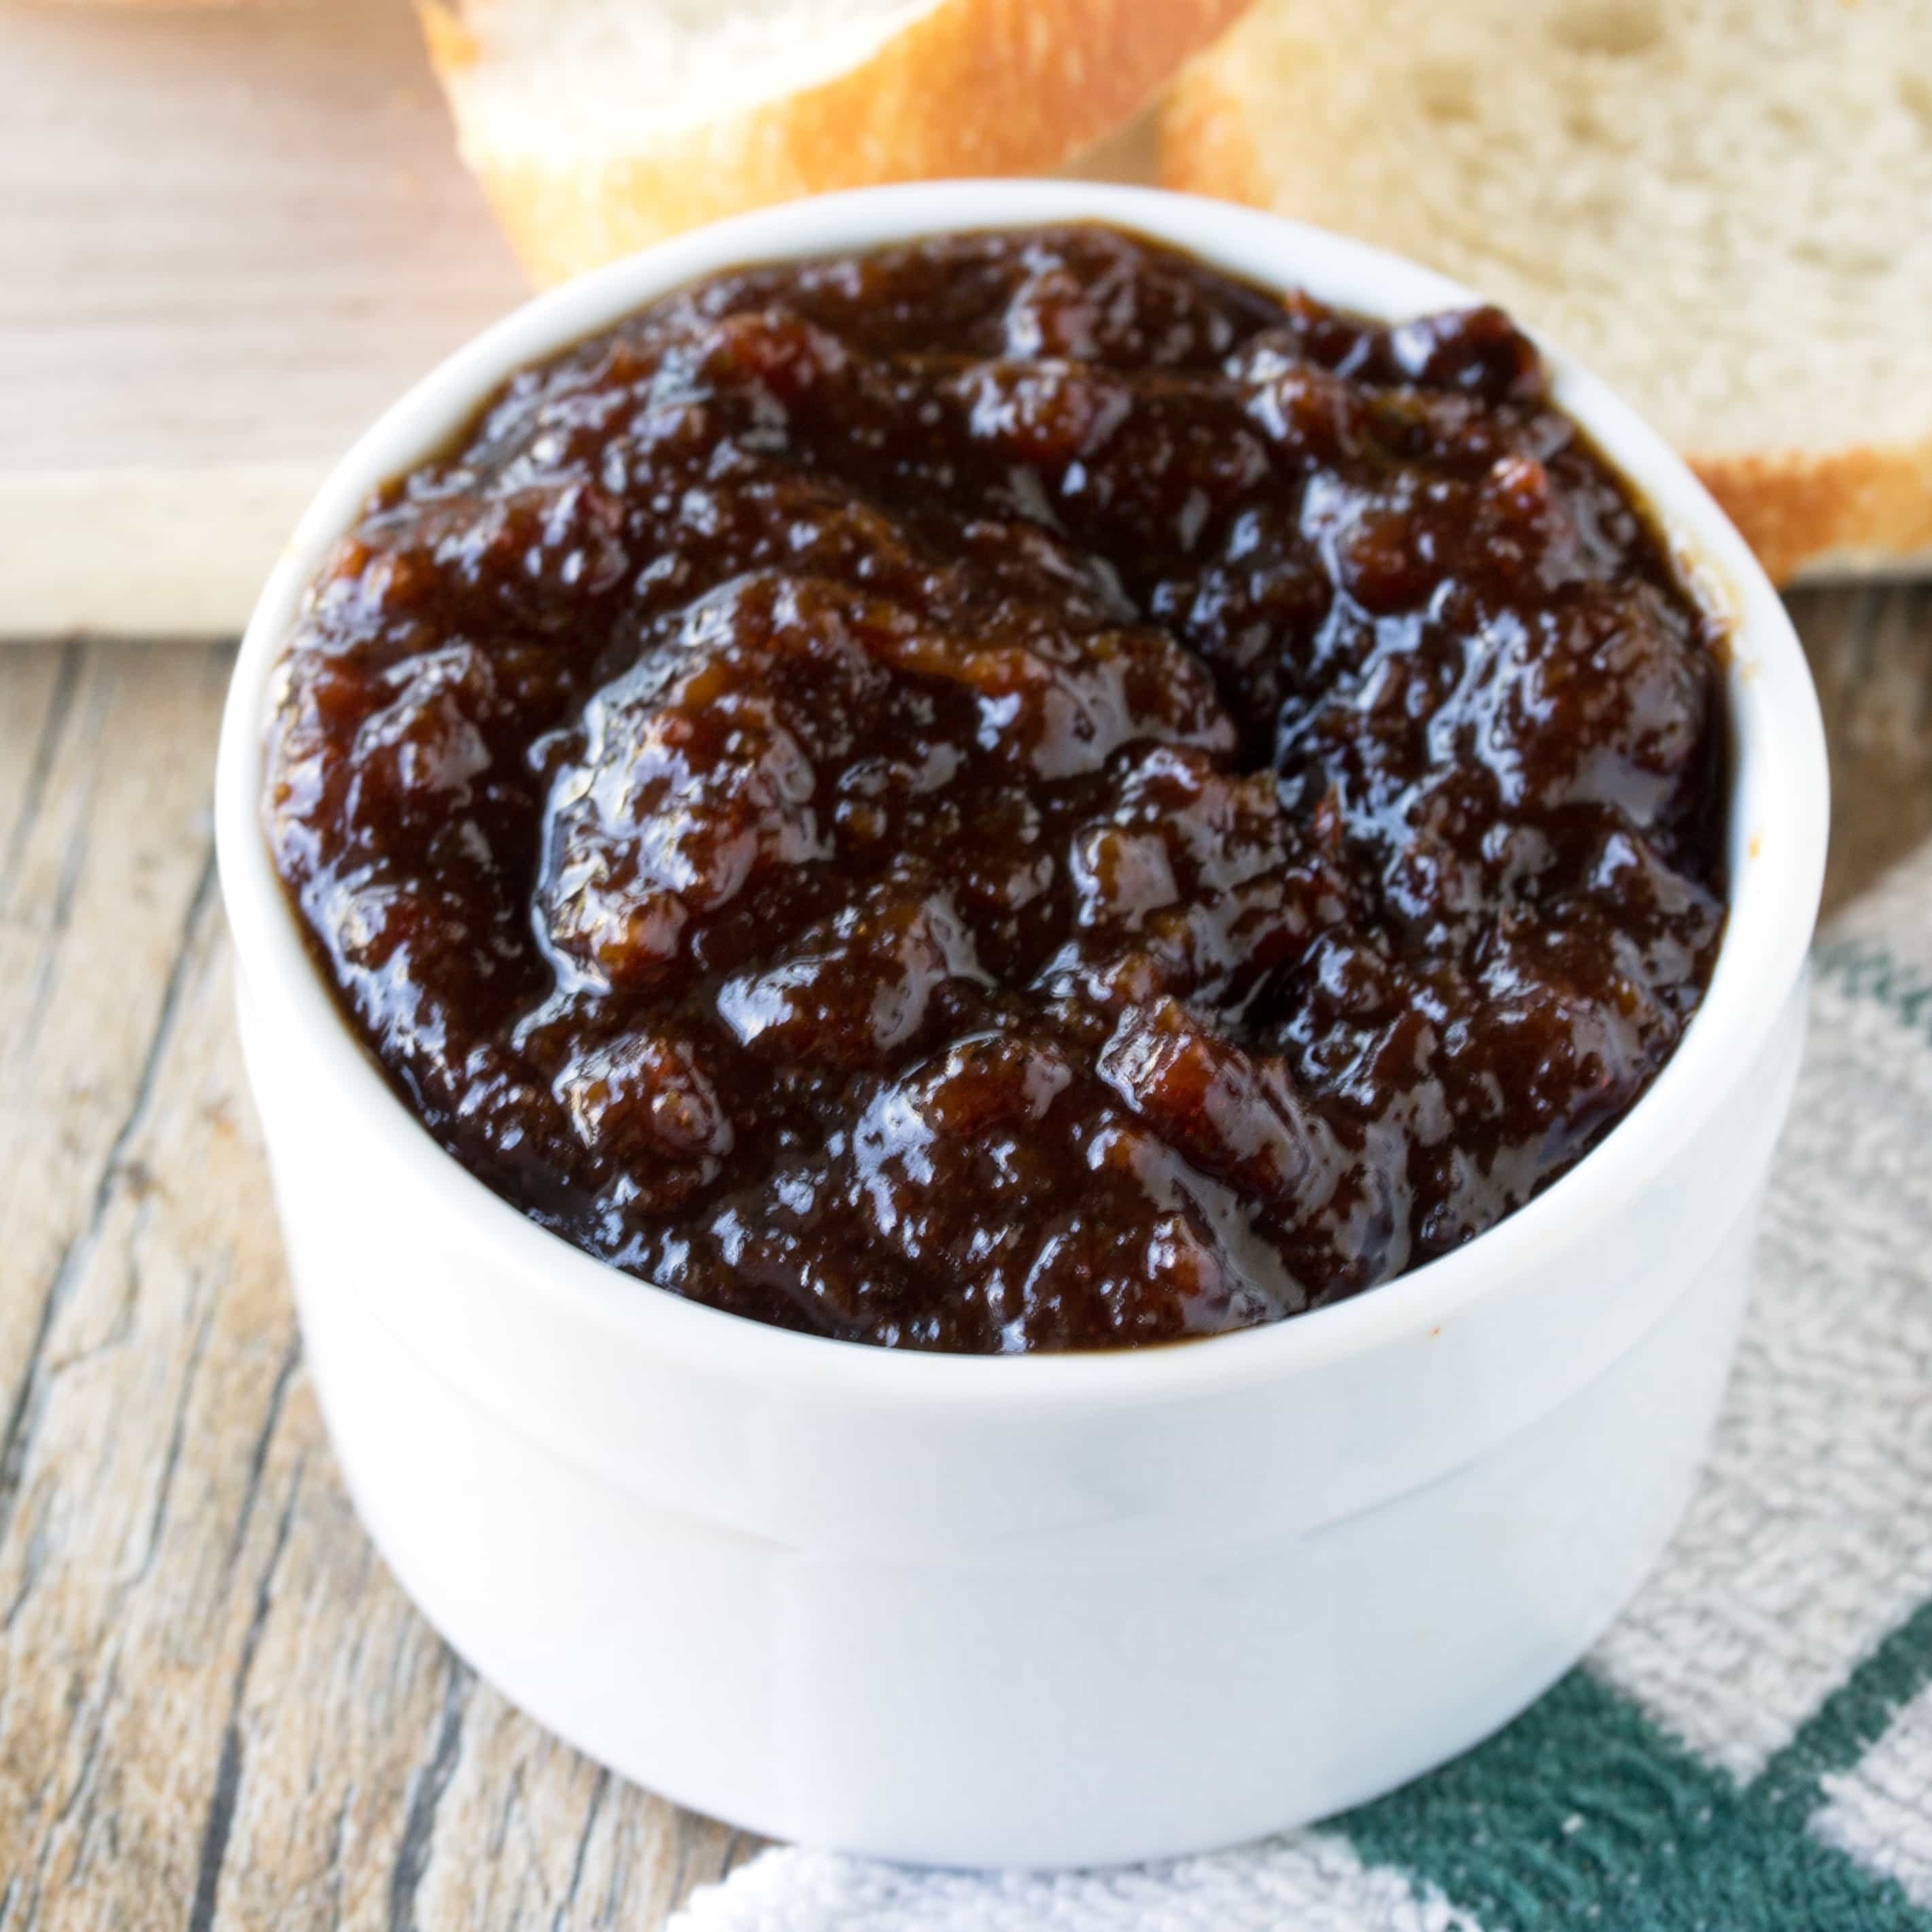 Bacon jam in a white bowl.